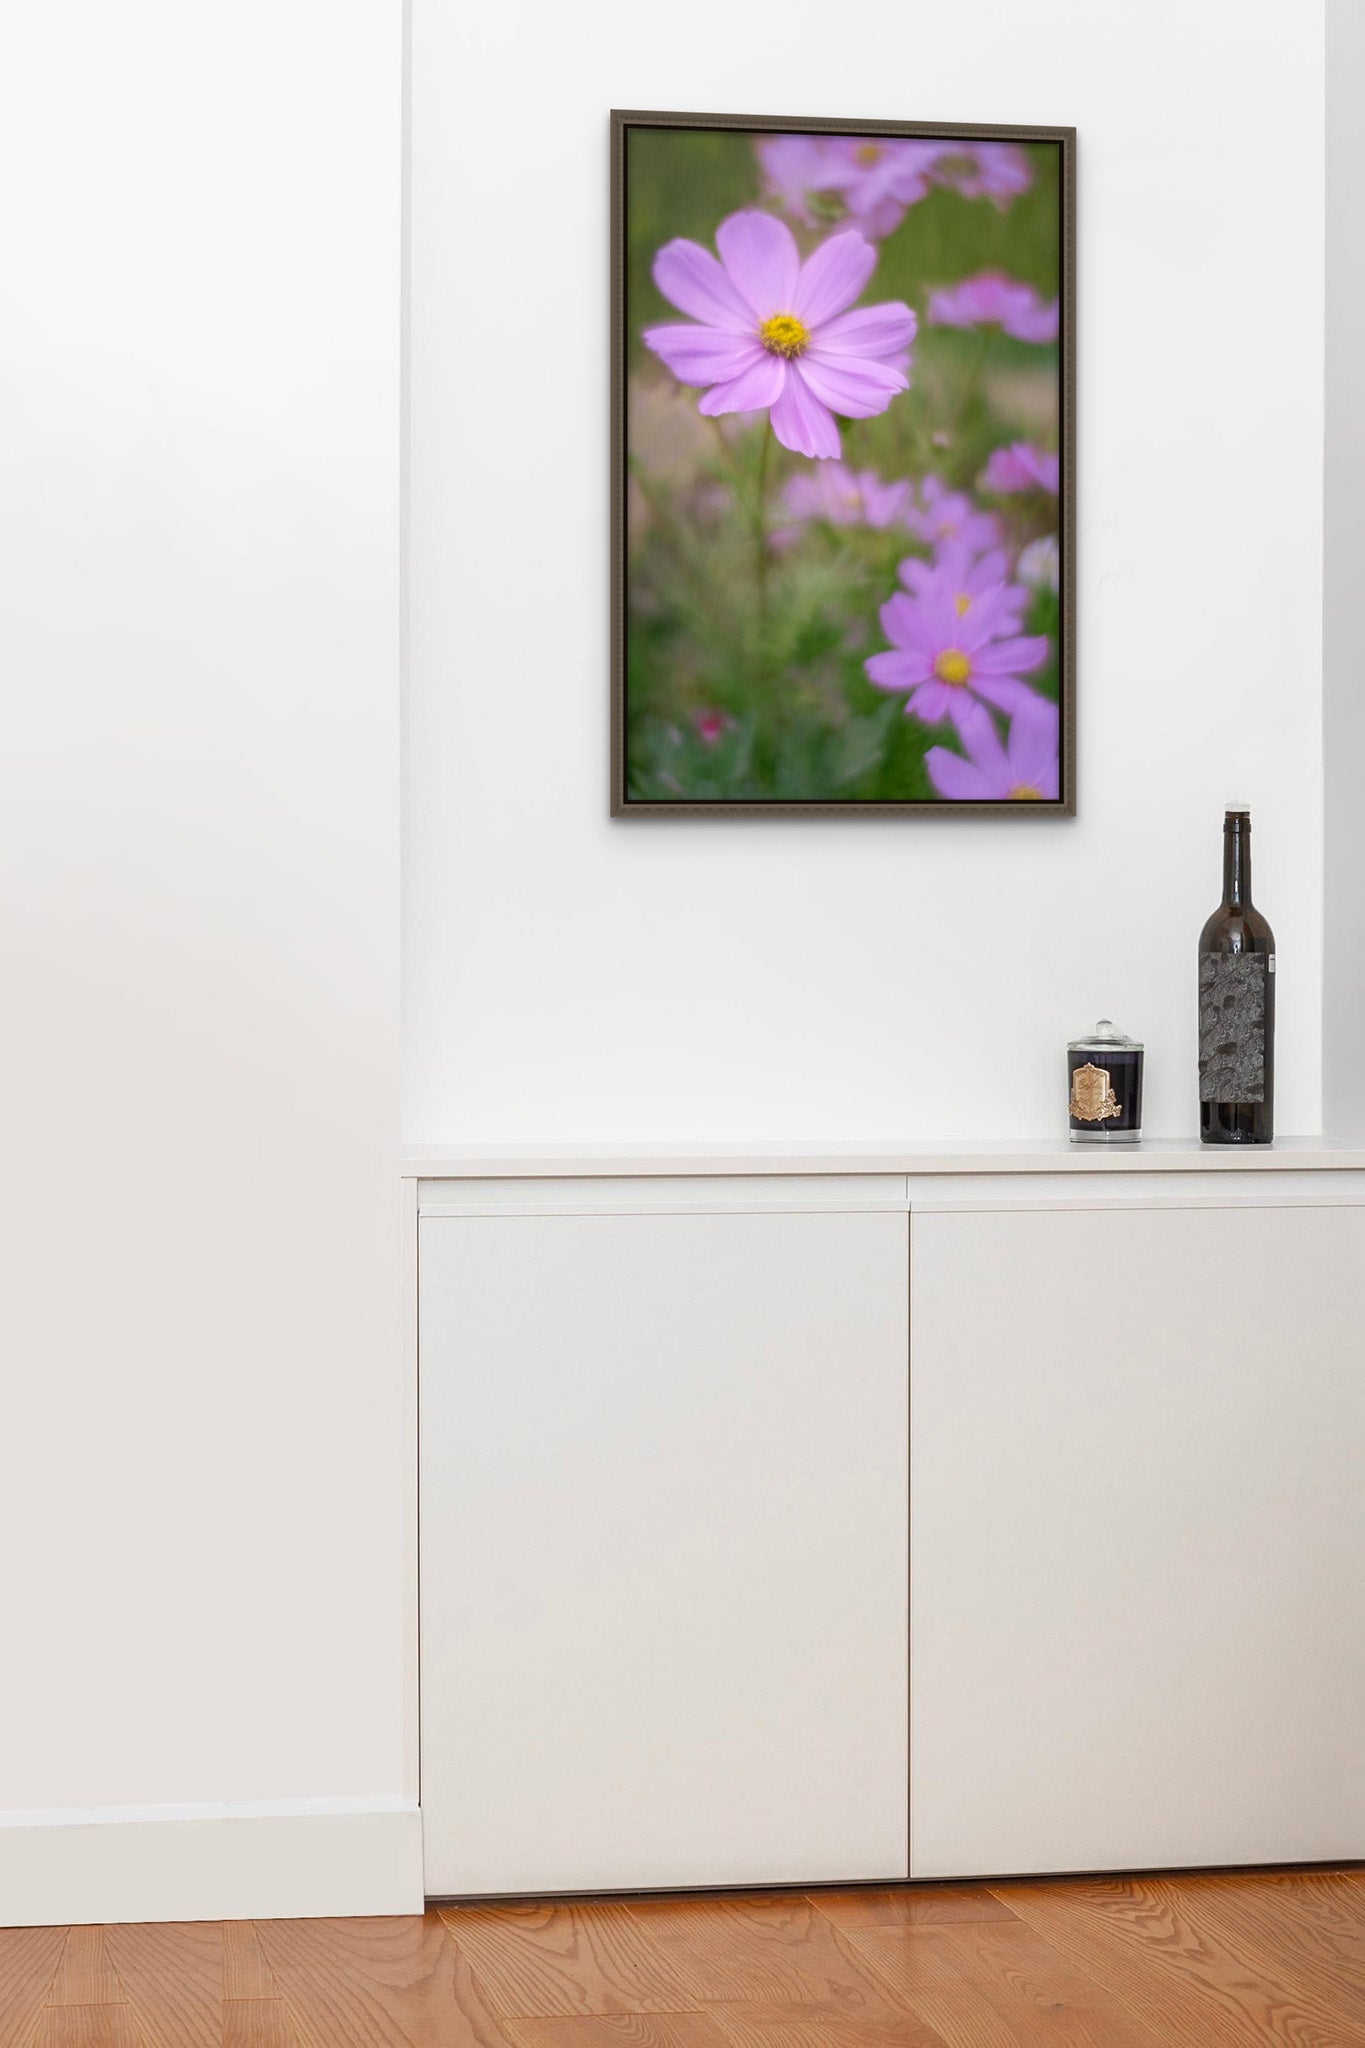 Float frame picture hanging on the wall of a mini bar area. There is a glass and a bottle of wine sitting on the bar. . The picture is a fine art flower photograph of a purple Cosmopolitan flower by Cameron Dreaux. 